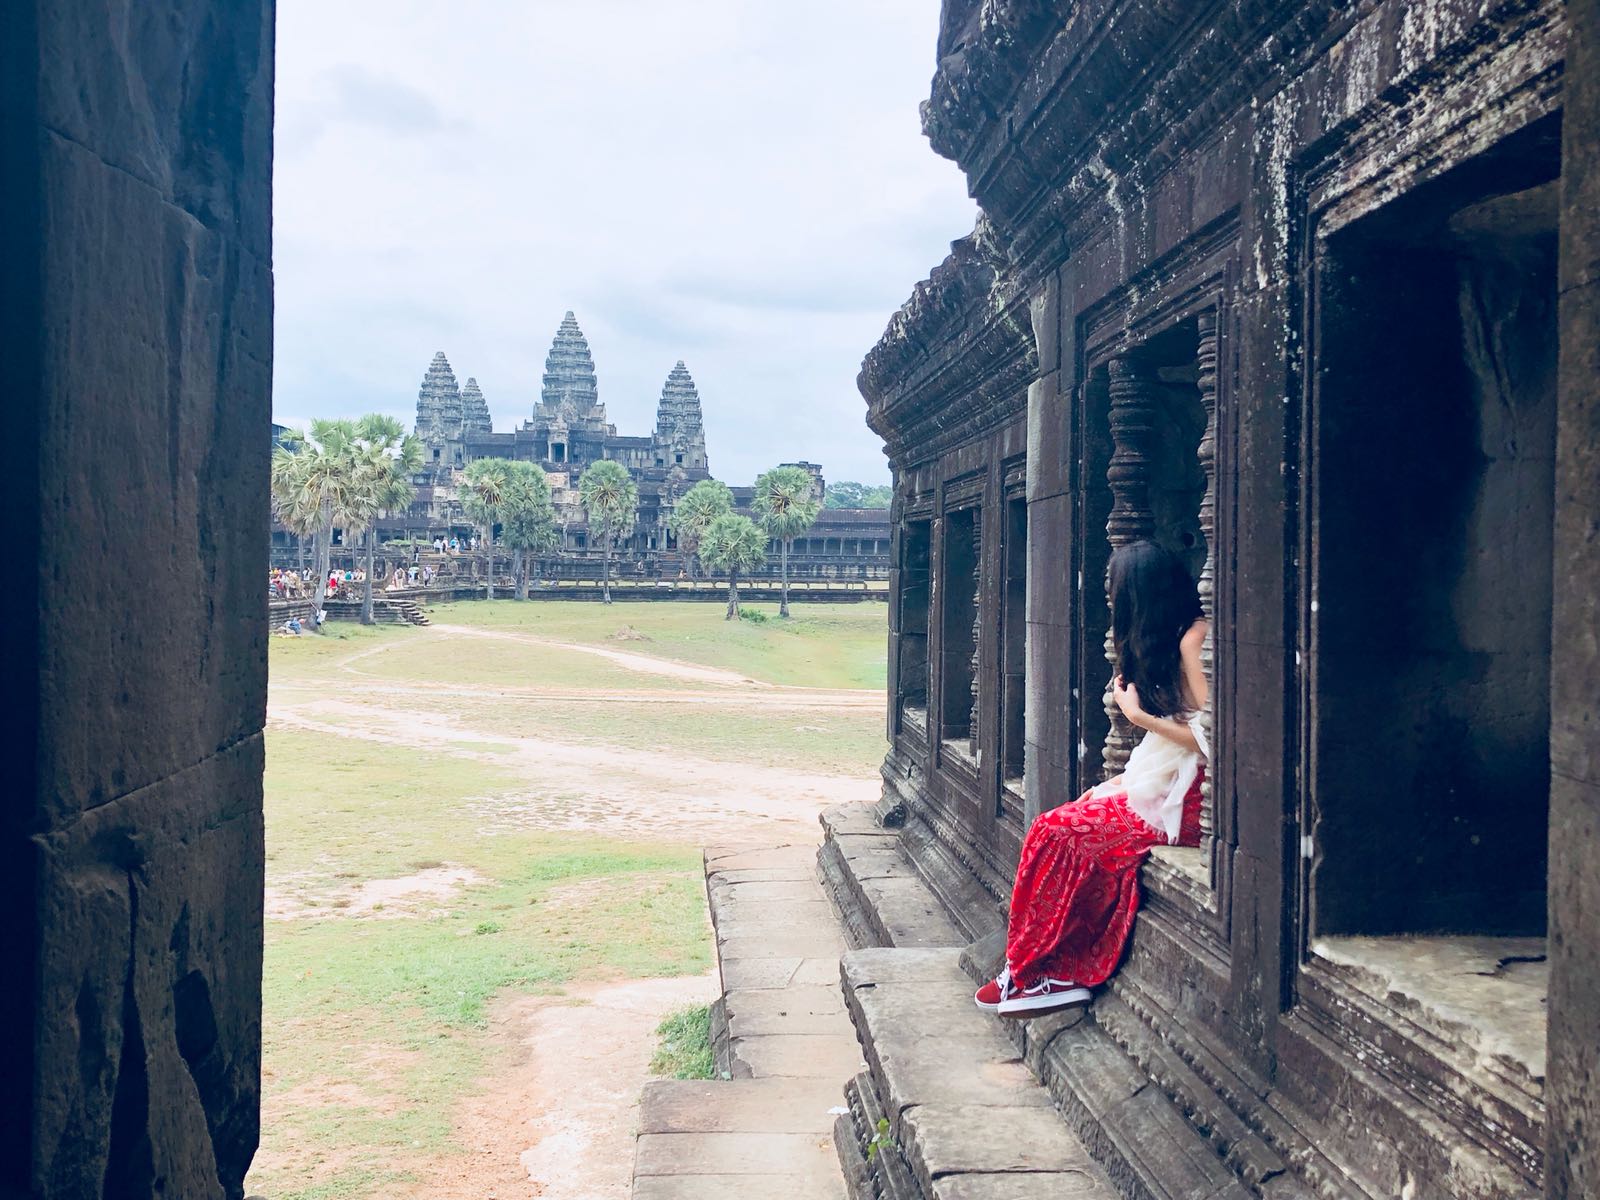 Every year, more than 1 million tourists head to Siem Reap to visit the UNESCO World Heritage site of Angkor 